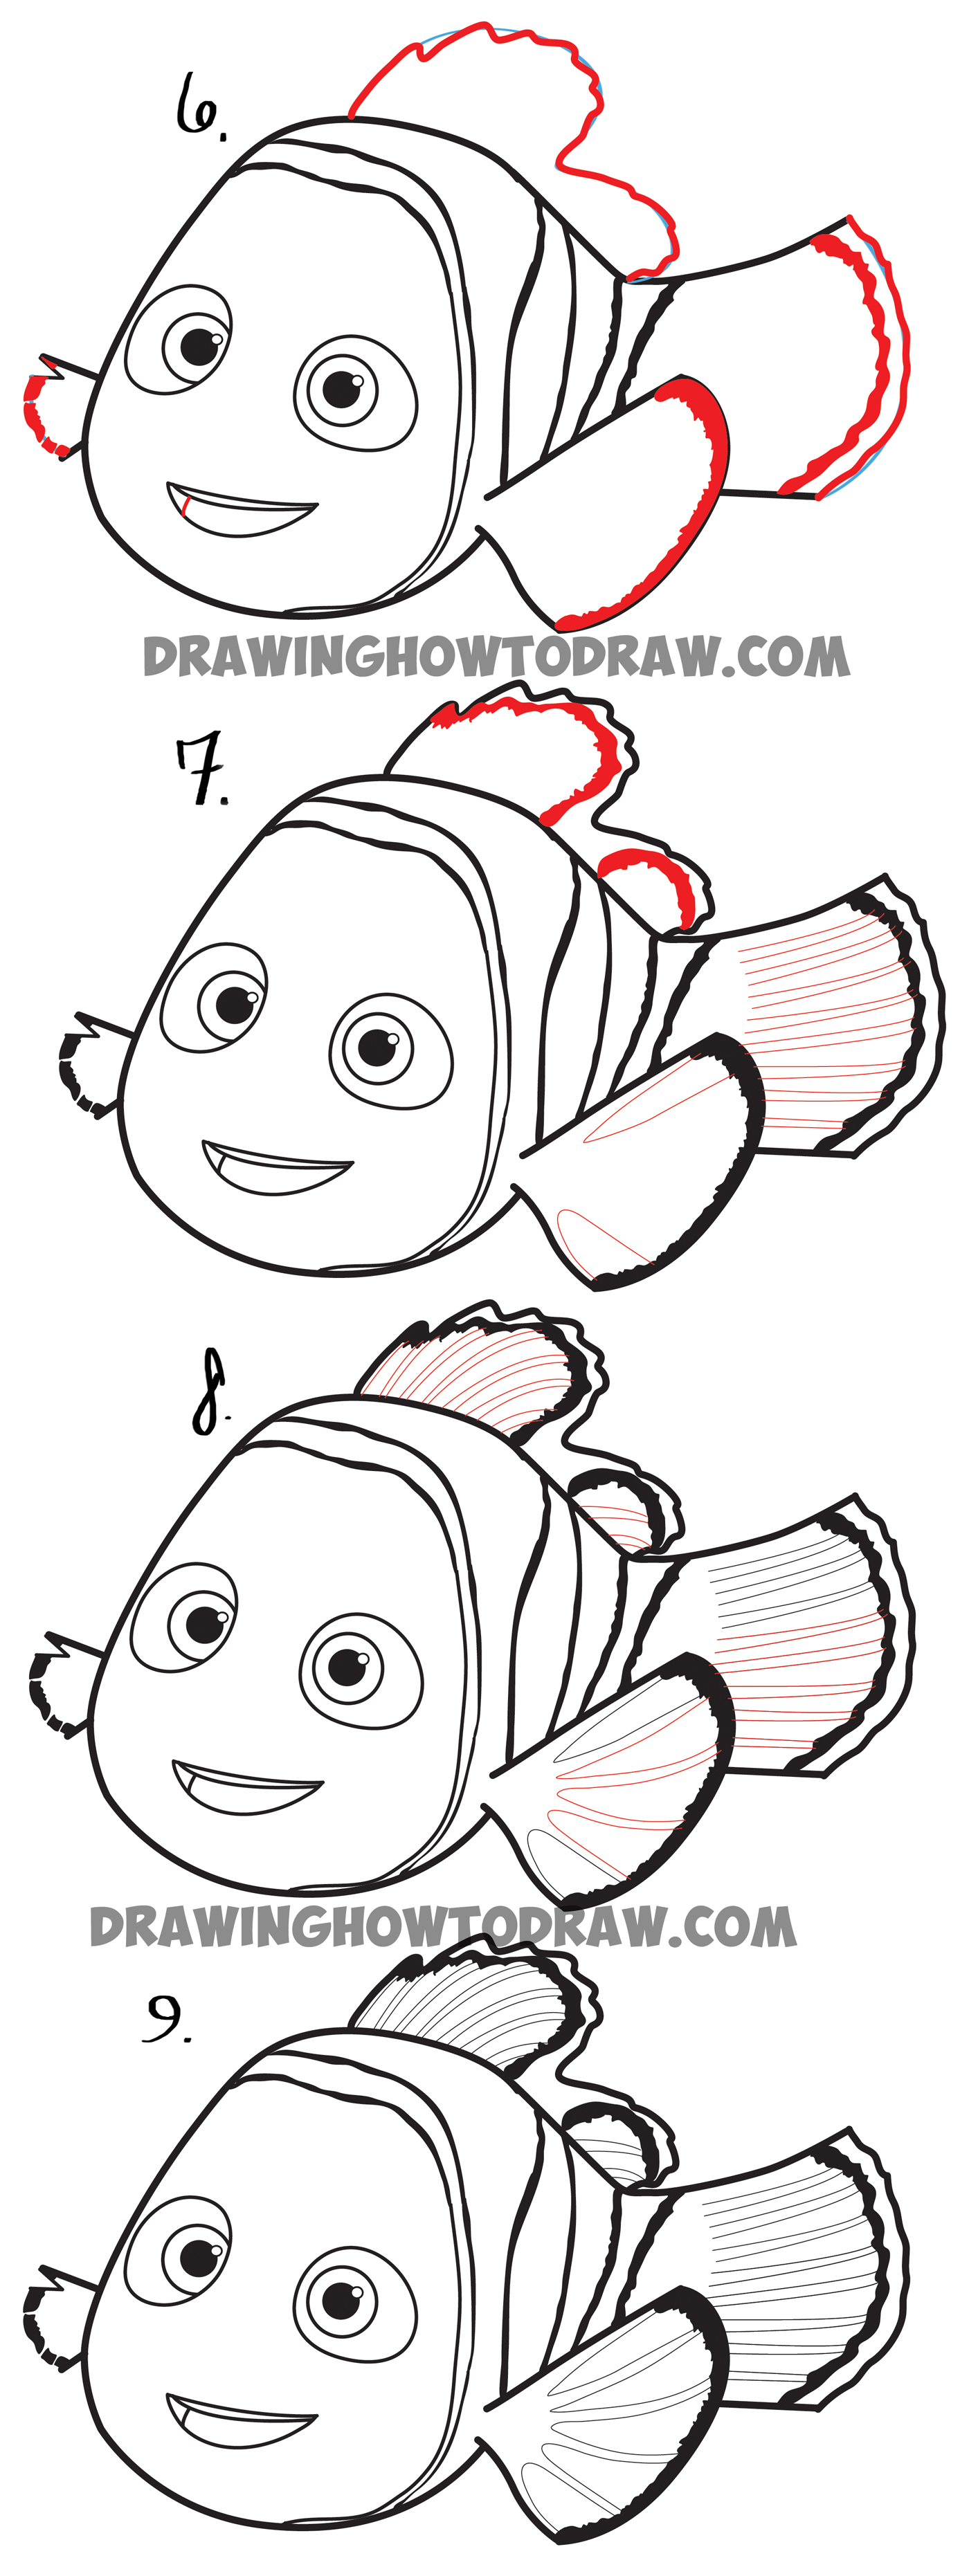 How to Draw Nemo in a Few Easy Steps